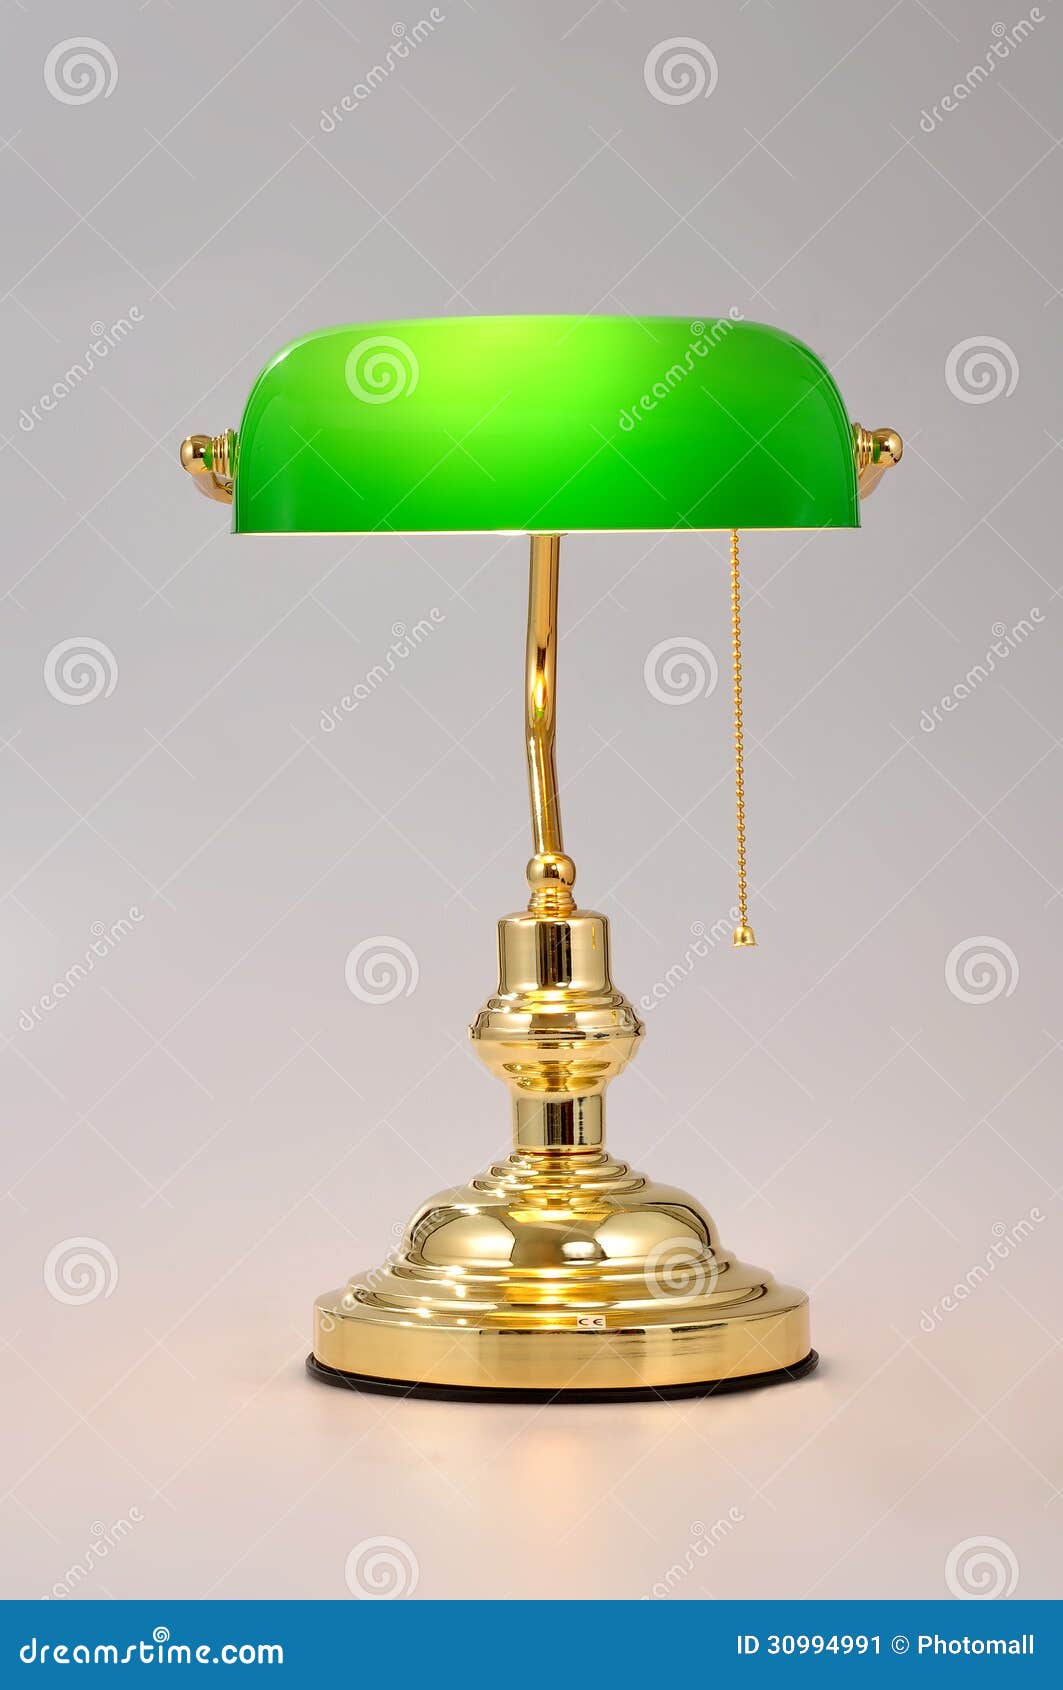 Classic Banker Desk Lamp With Gold Pull Chain Isolated On White ... - Classic Banker desk lamp with gold pull chain isolated on white background